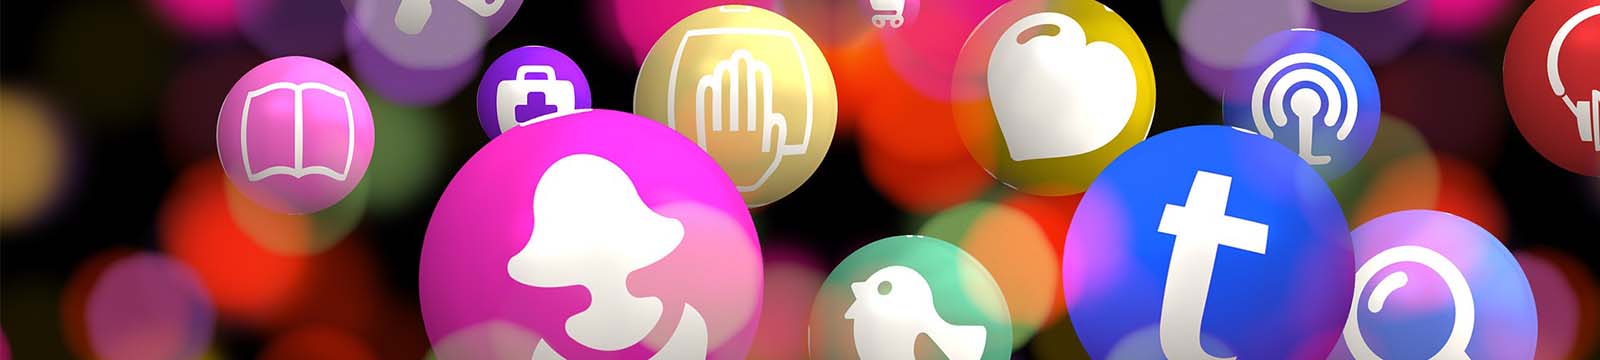 Various colorful bubbles, each with a different icon representing both traditional and online communication channels.